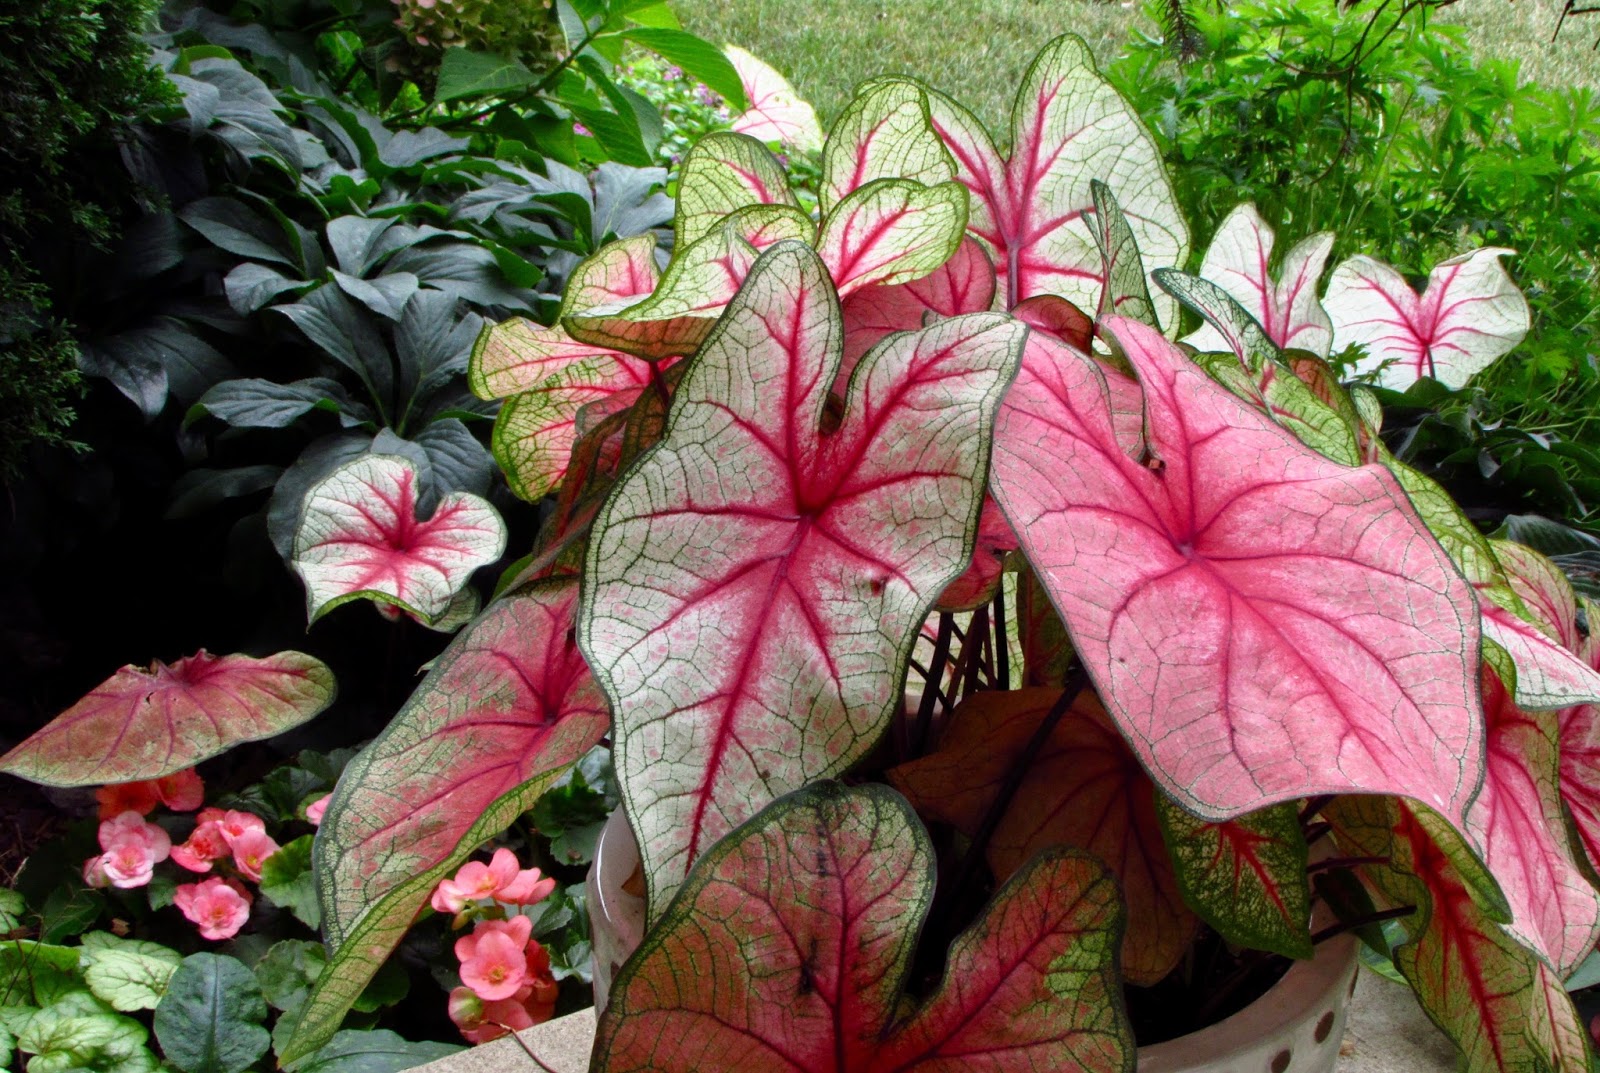 Caladiums give great color in the shade without flowers